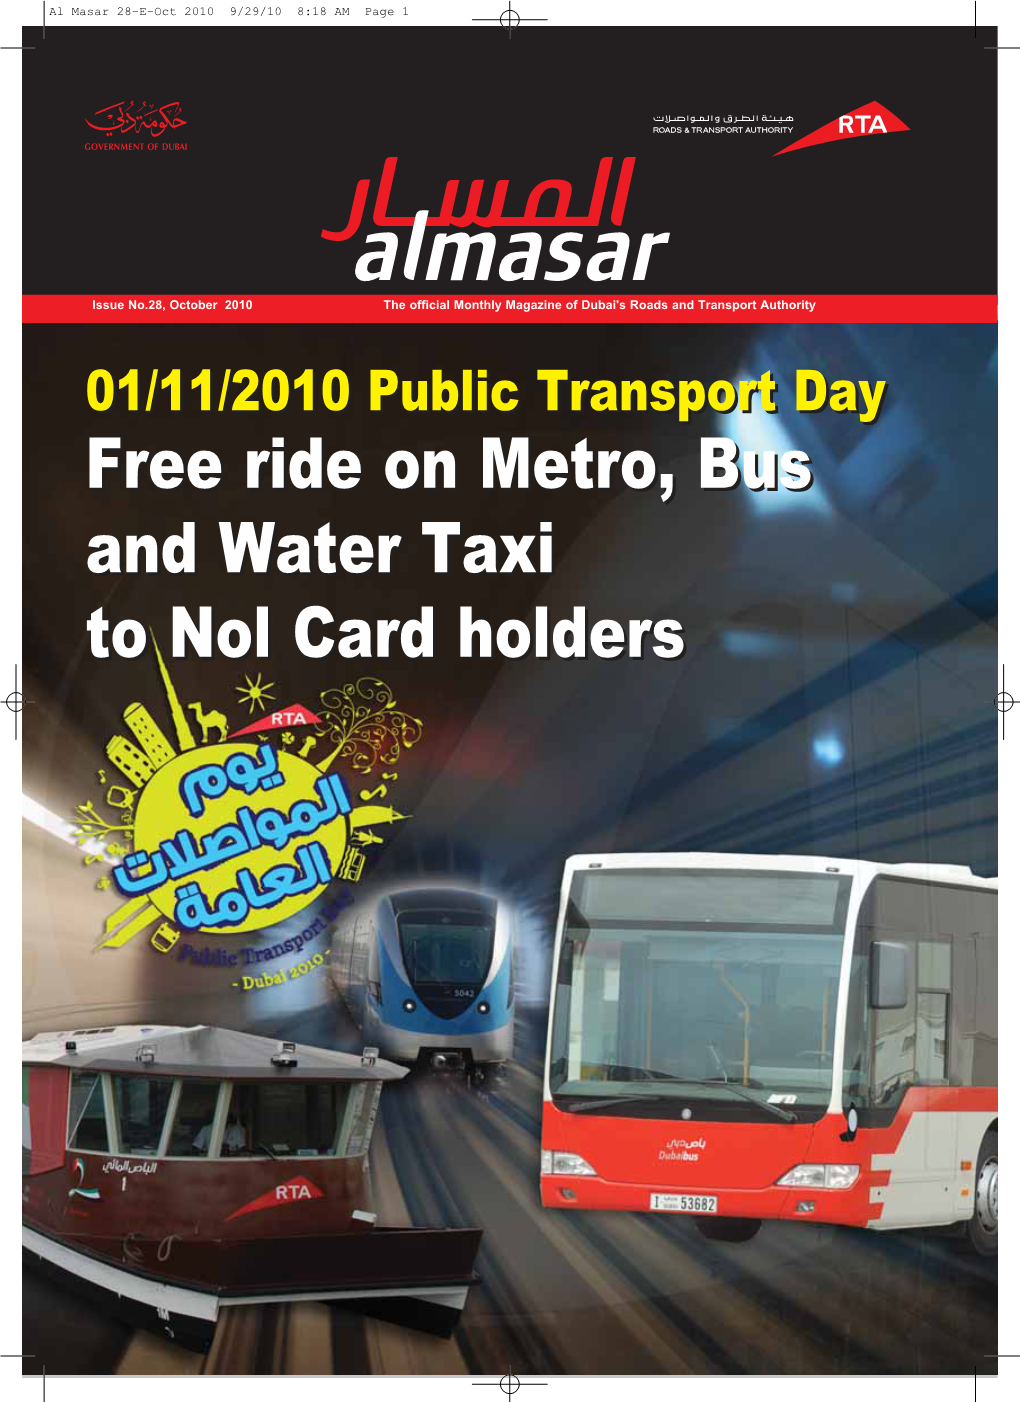 Free Ride on Metro, Bus and Water Taxi to Nol Card Holders Free Ride